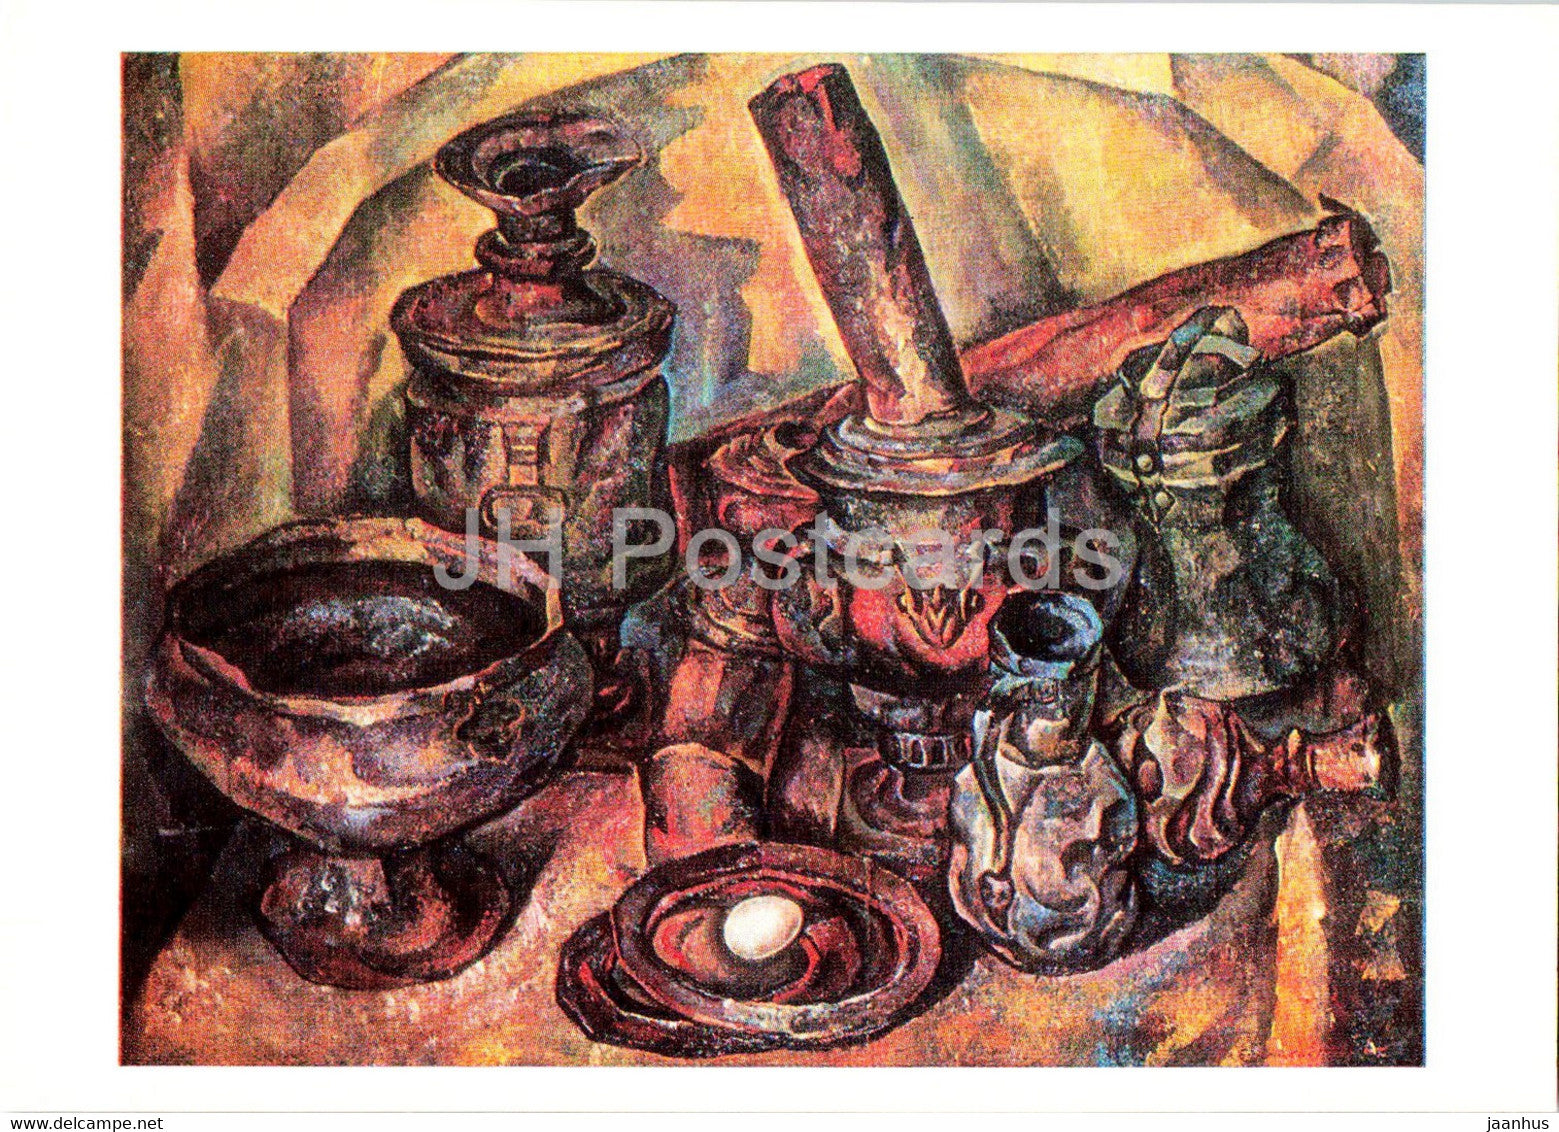 painting by V. Burmakin - The Life of Things - Uzbek Art - 1984 - Russia USSR - unused - JH Postcards